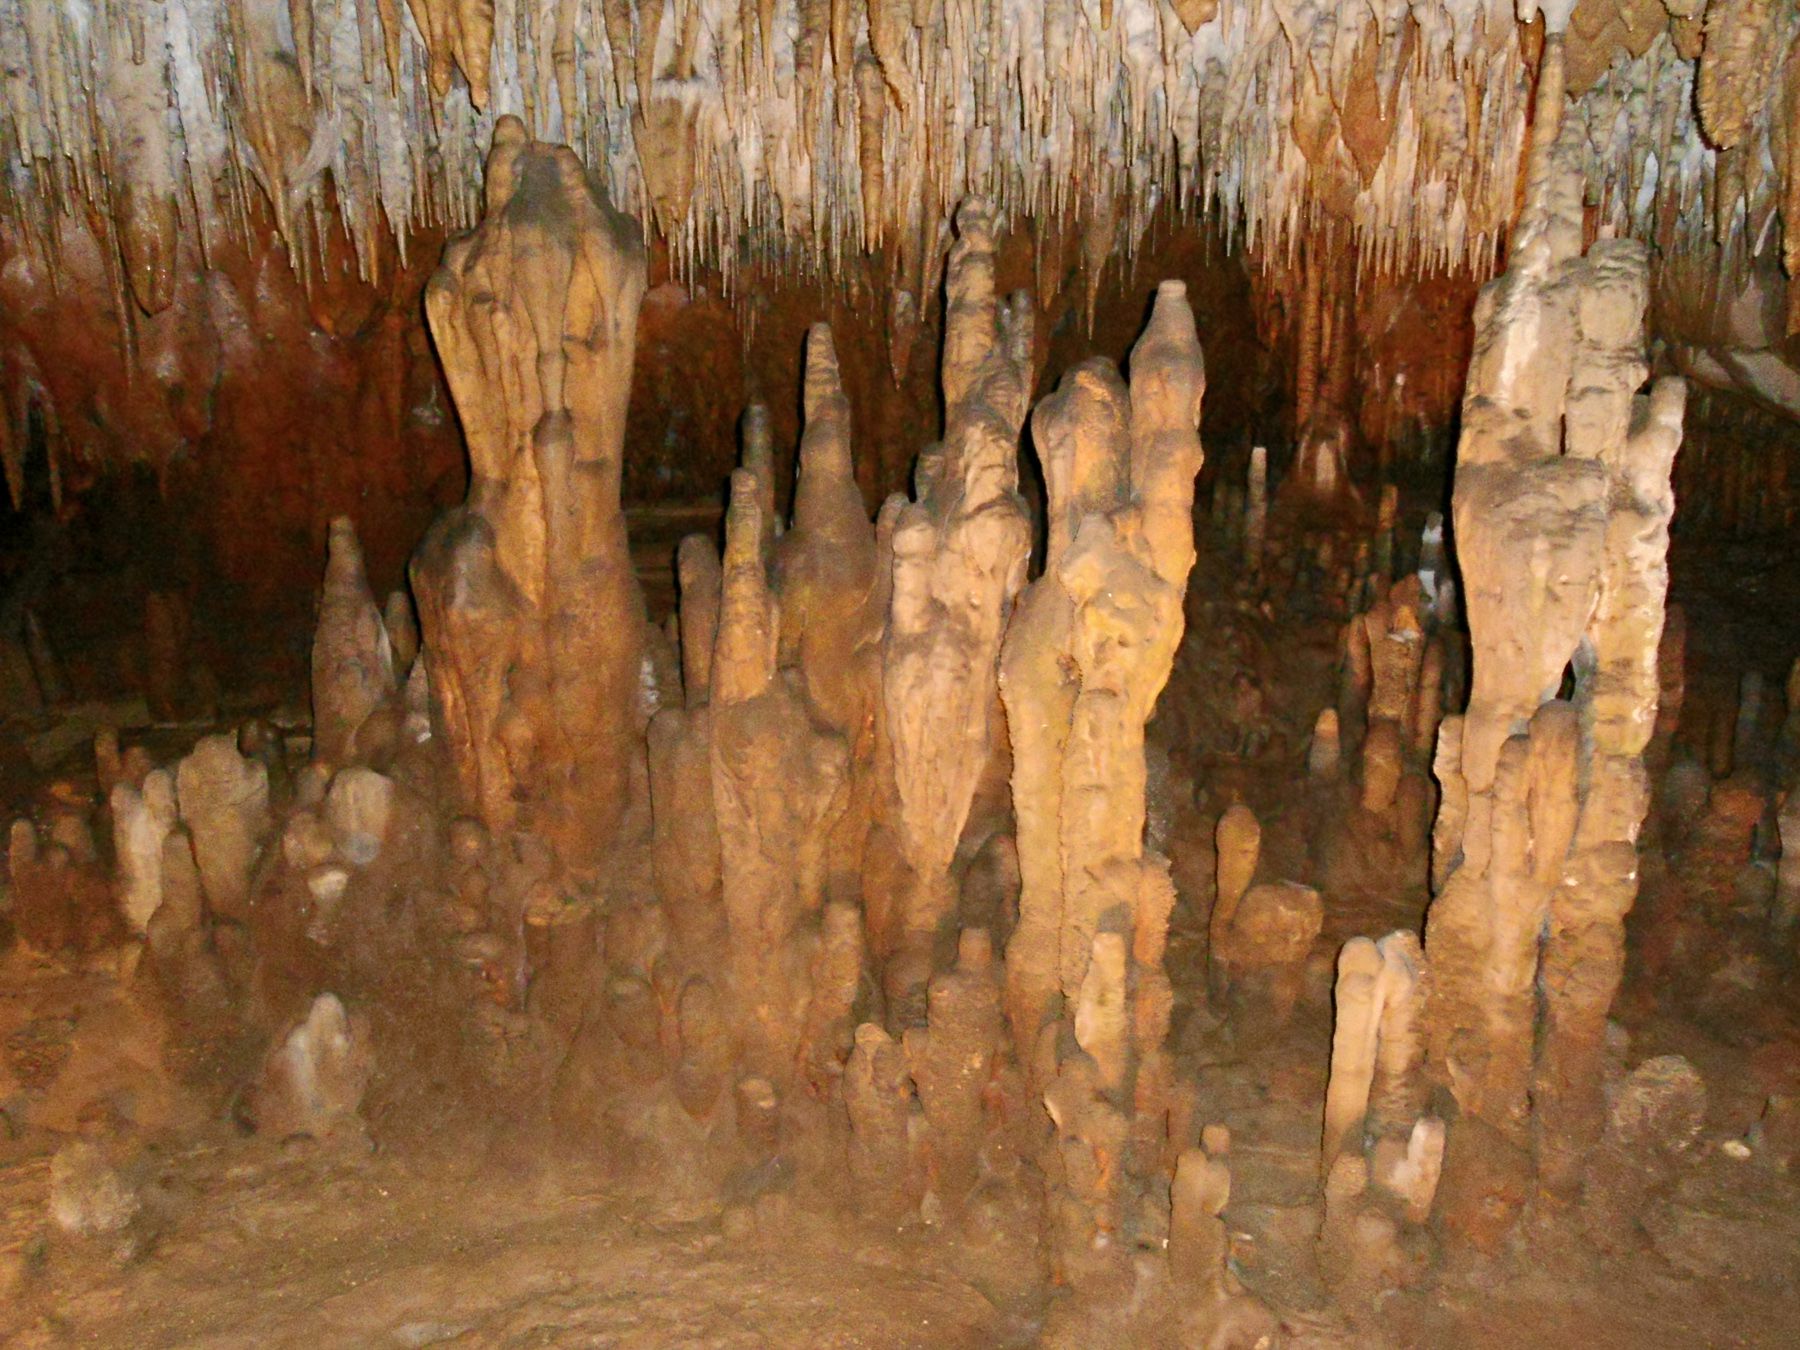 <p><b>Marianna, Florida</b></p><p>Stalactites and stalagmites abound in the depths of <a href="https://www.floridastateparks.org/parks-and-trails/florida-caverns-state-park">Florida Caverns</a>. Visitors can explore the limestone underground cave system that is amplified with a new LED lighting system for a truly colorful experience. Tours cost $10.75 for ages 13 and up; $5 for ages 3 to 12.</p>